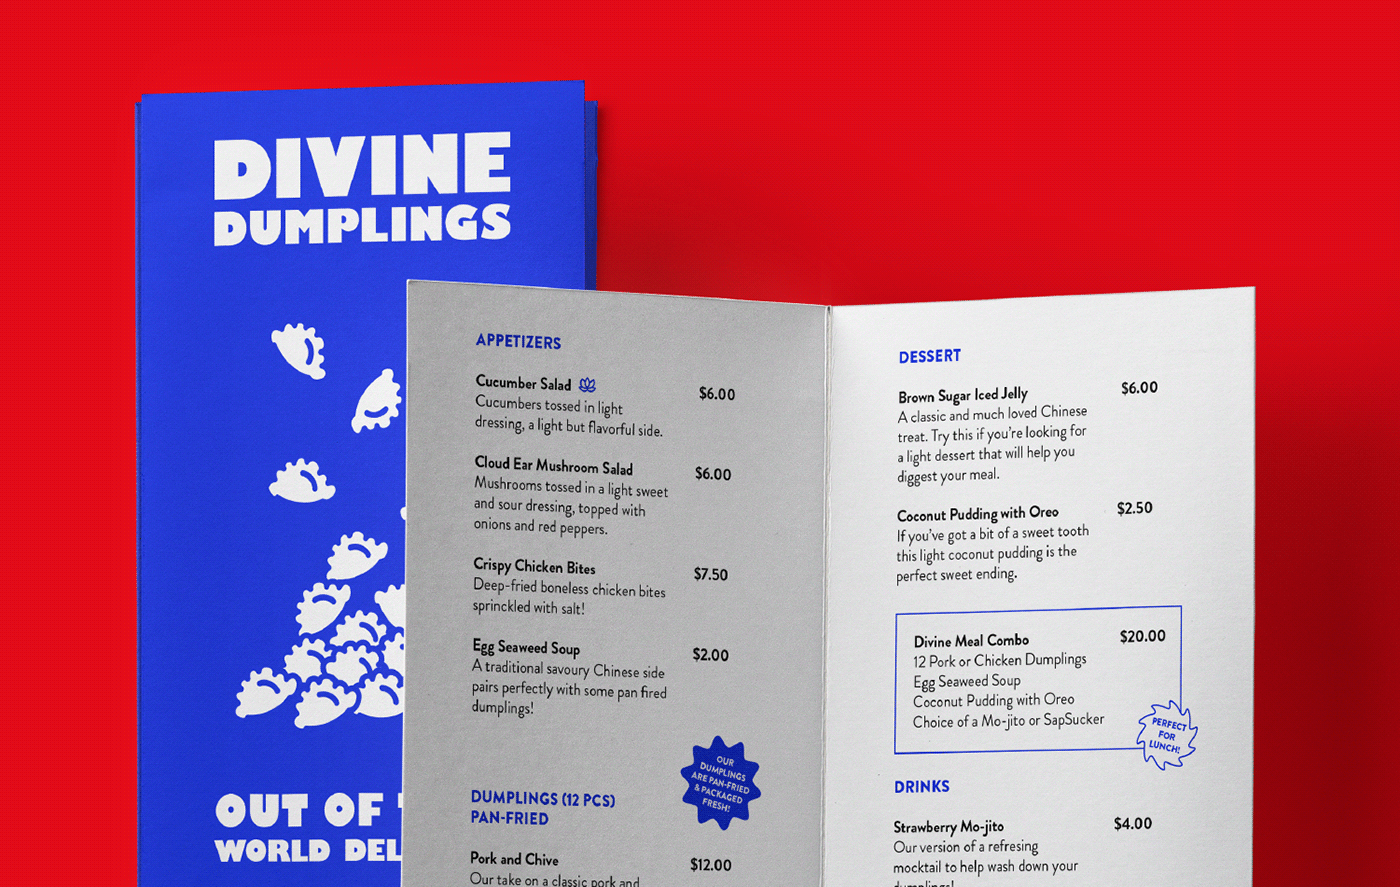 Photo of the take-out menu front cover and inside pages